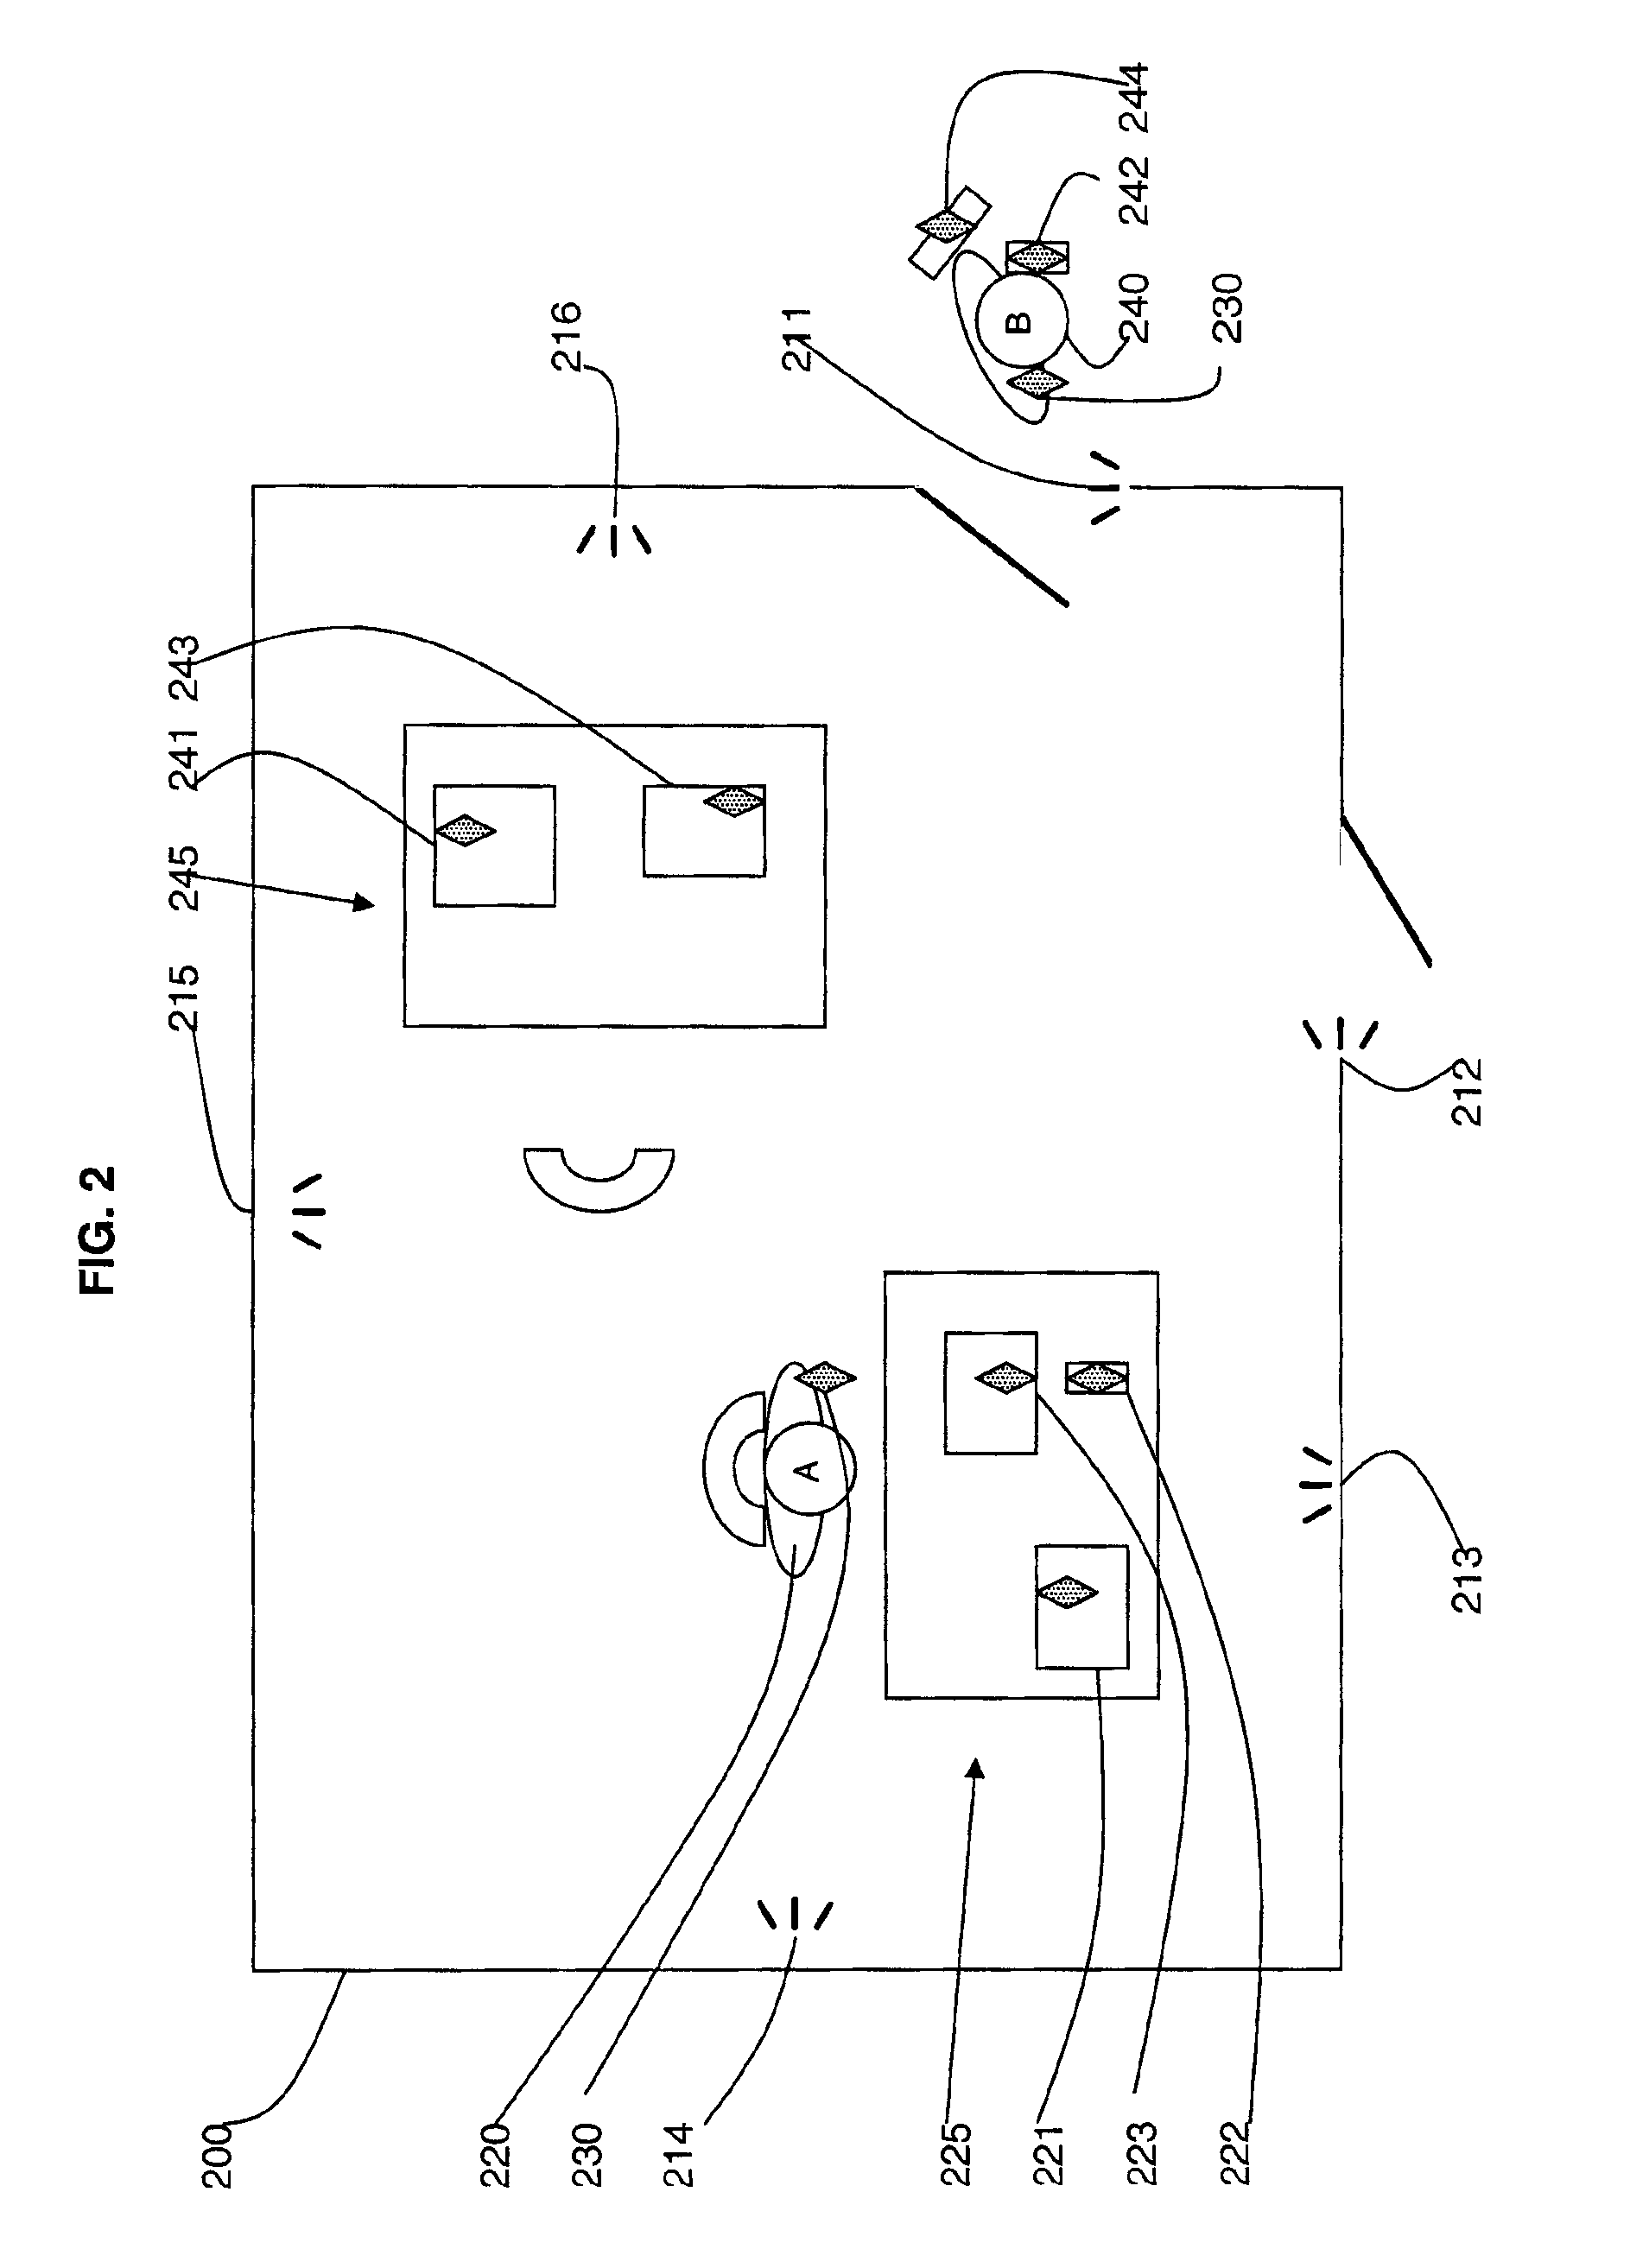 System and method for locking electronic devices